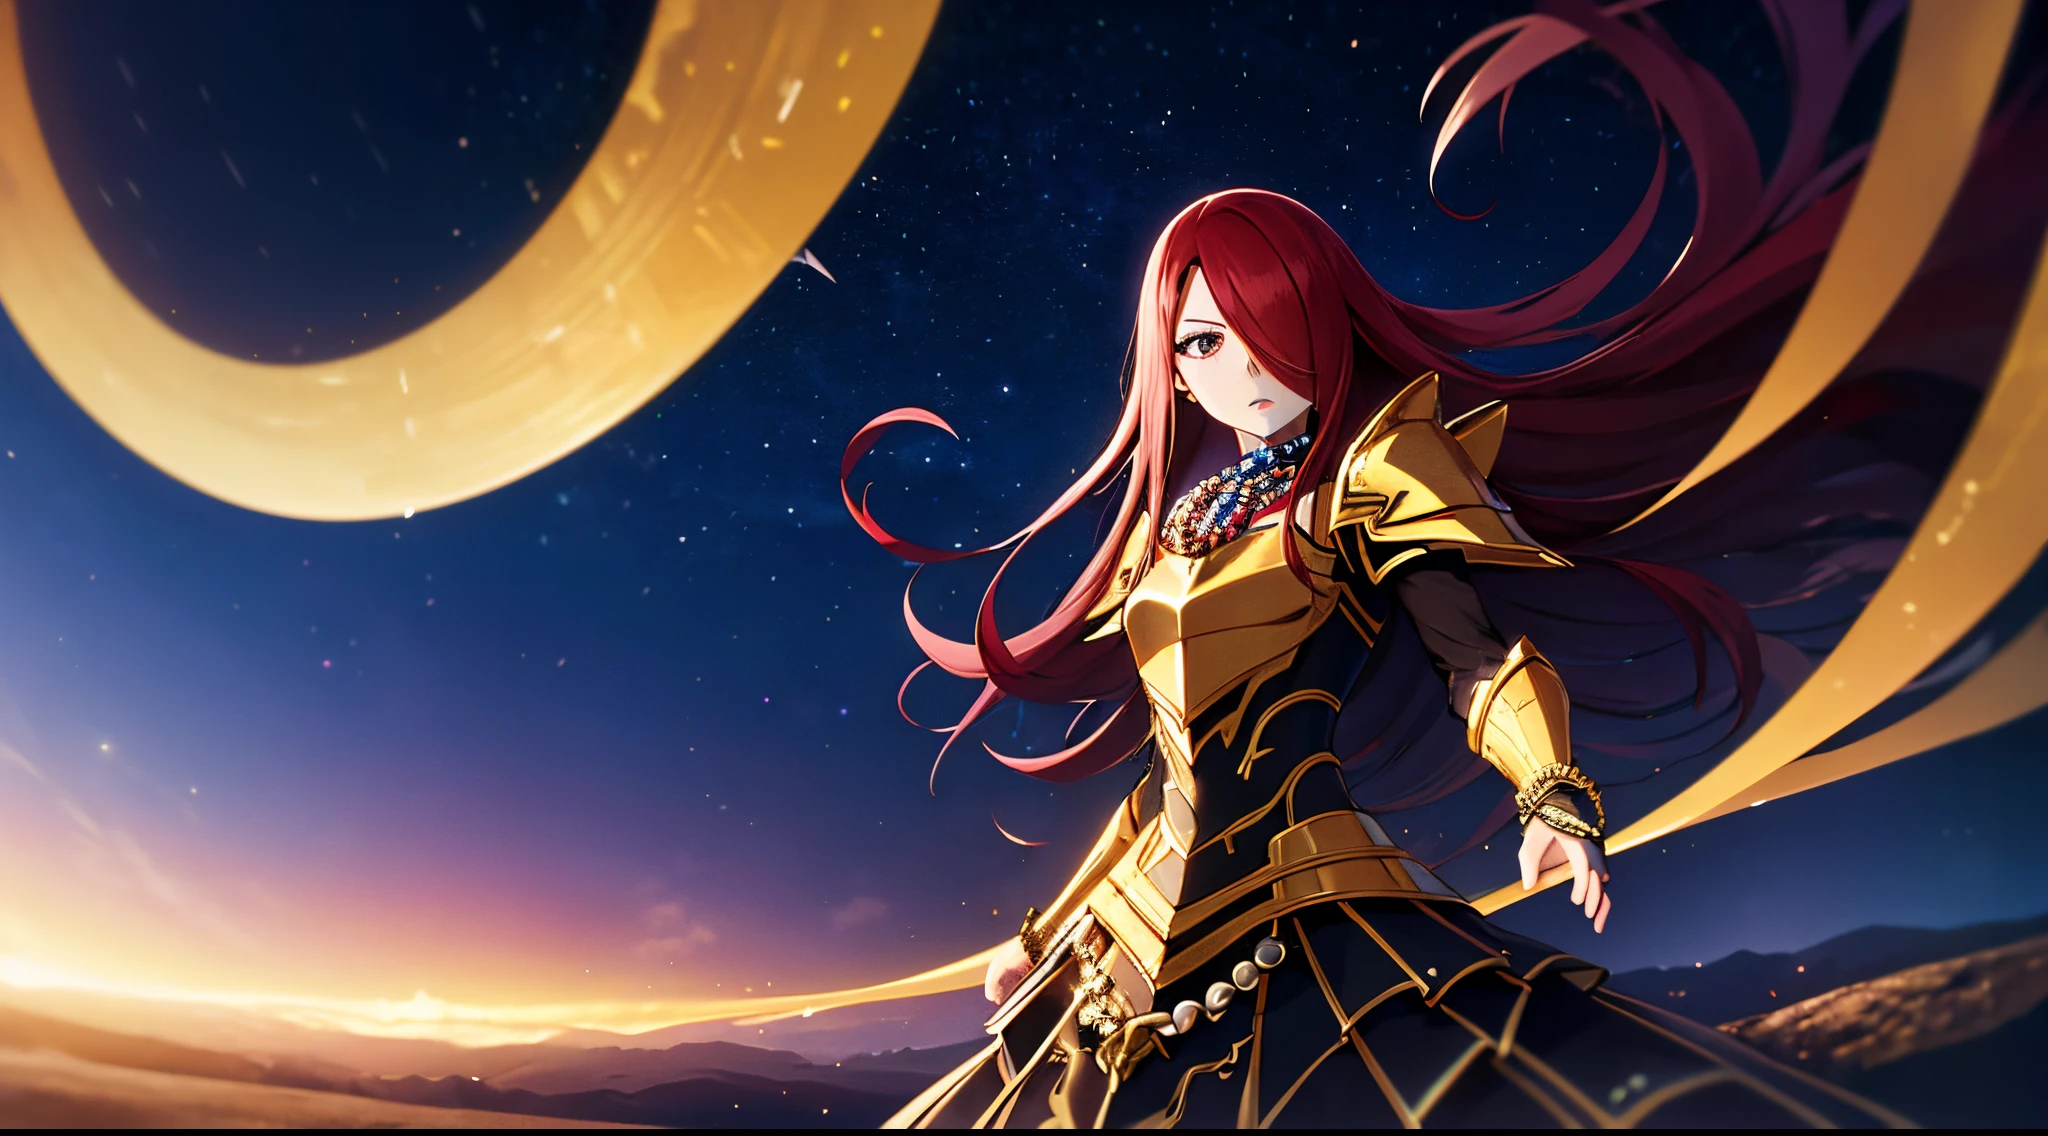 erza, 1girl, solo, long_hair, medium breasts,brown_eyes,red_hair,hair over one eye, standing, looking at viewer,golden knight armor pauldrons, praying beads on neck, long skirt,desert night sky nebulae,anime style,deep depth of field,wide angle view,Lumen Reflections,Screen Space Reflections,Diffraction Grading,Chromatic Aberration,GB Displacement,Scan Lines,Ray Traced,Anti-Aliasing,FXAA,TXAA,RTX,SSAO,Shaders,OpenGL-Shaders,GLSL-Shaders,Post Processing,Post-Production,cell Shading,Tone Mapping,CGI,VFX,SFX,insanely detailed and intricate, 4K